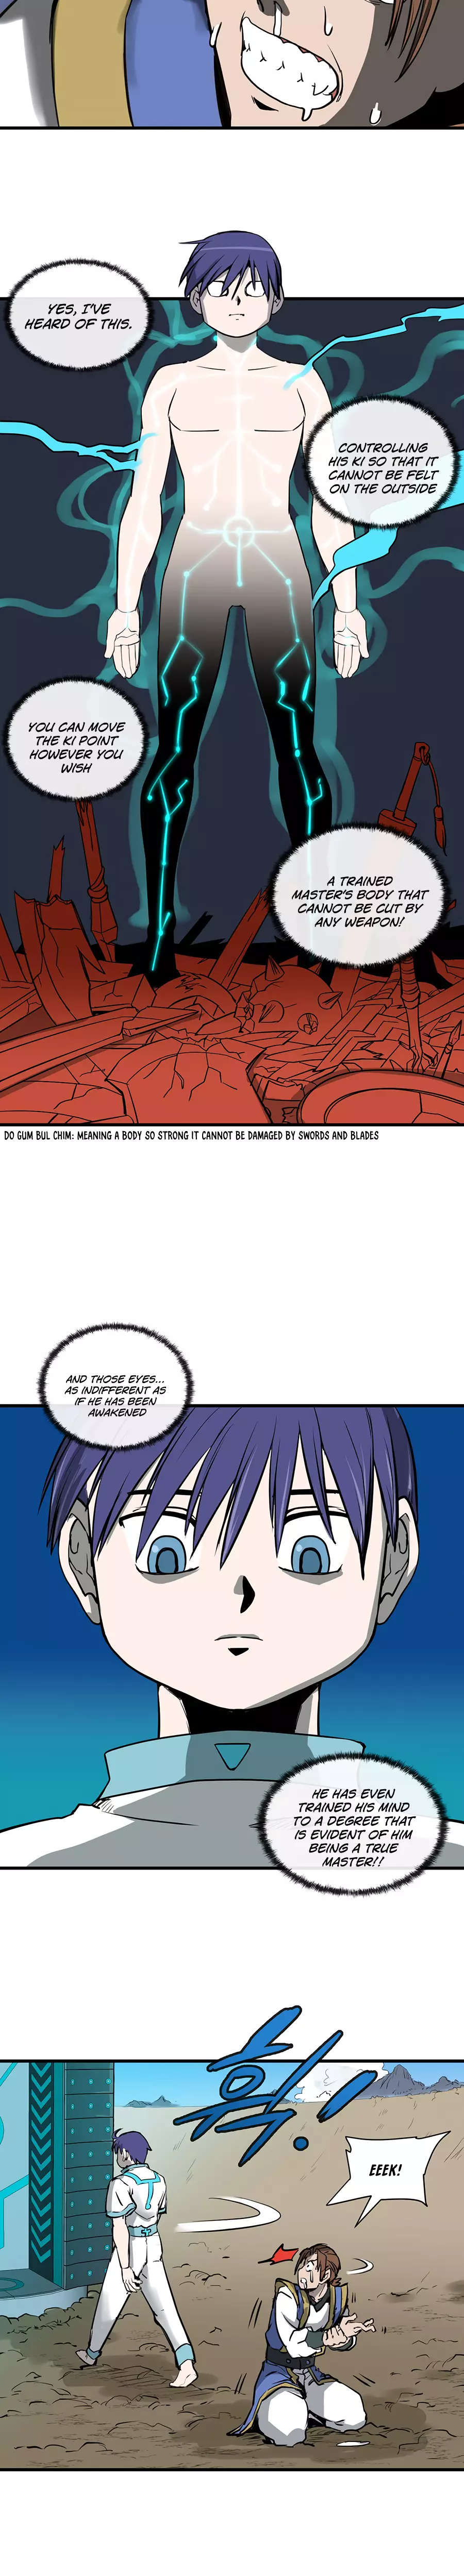 Androids Have No Blood - 1 page 11